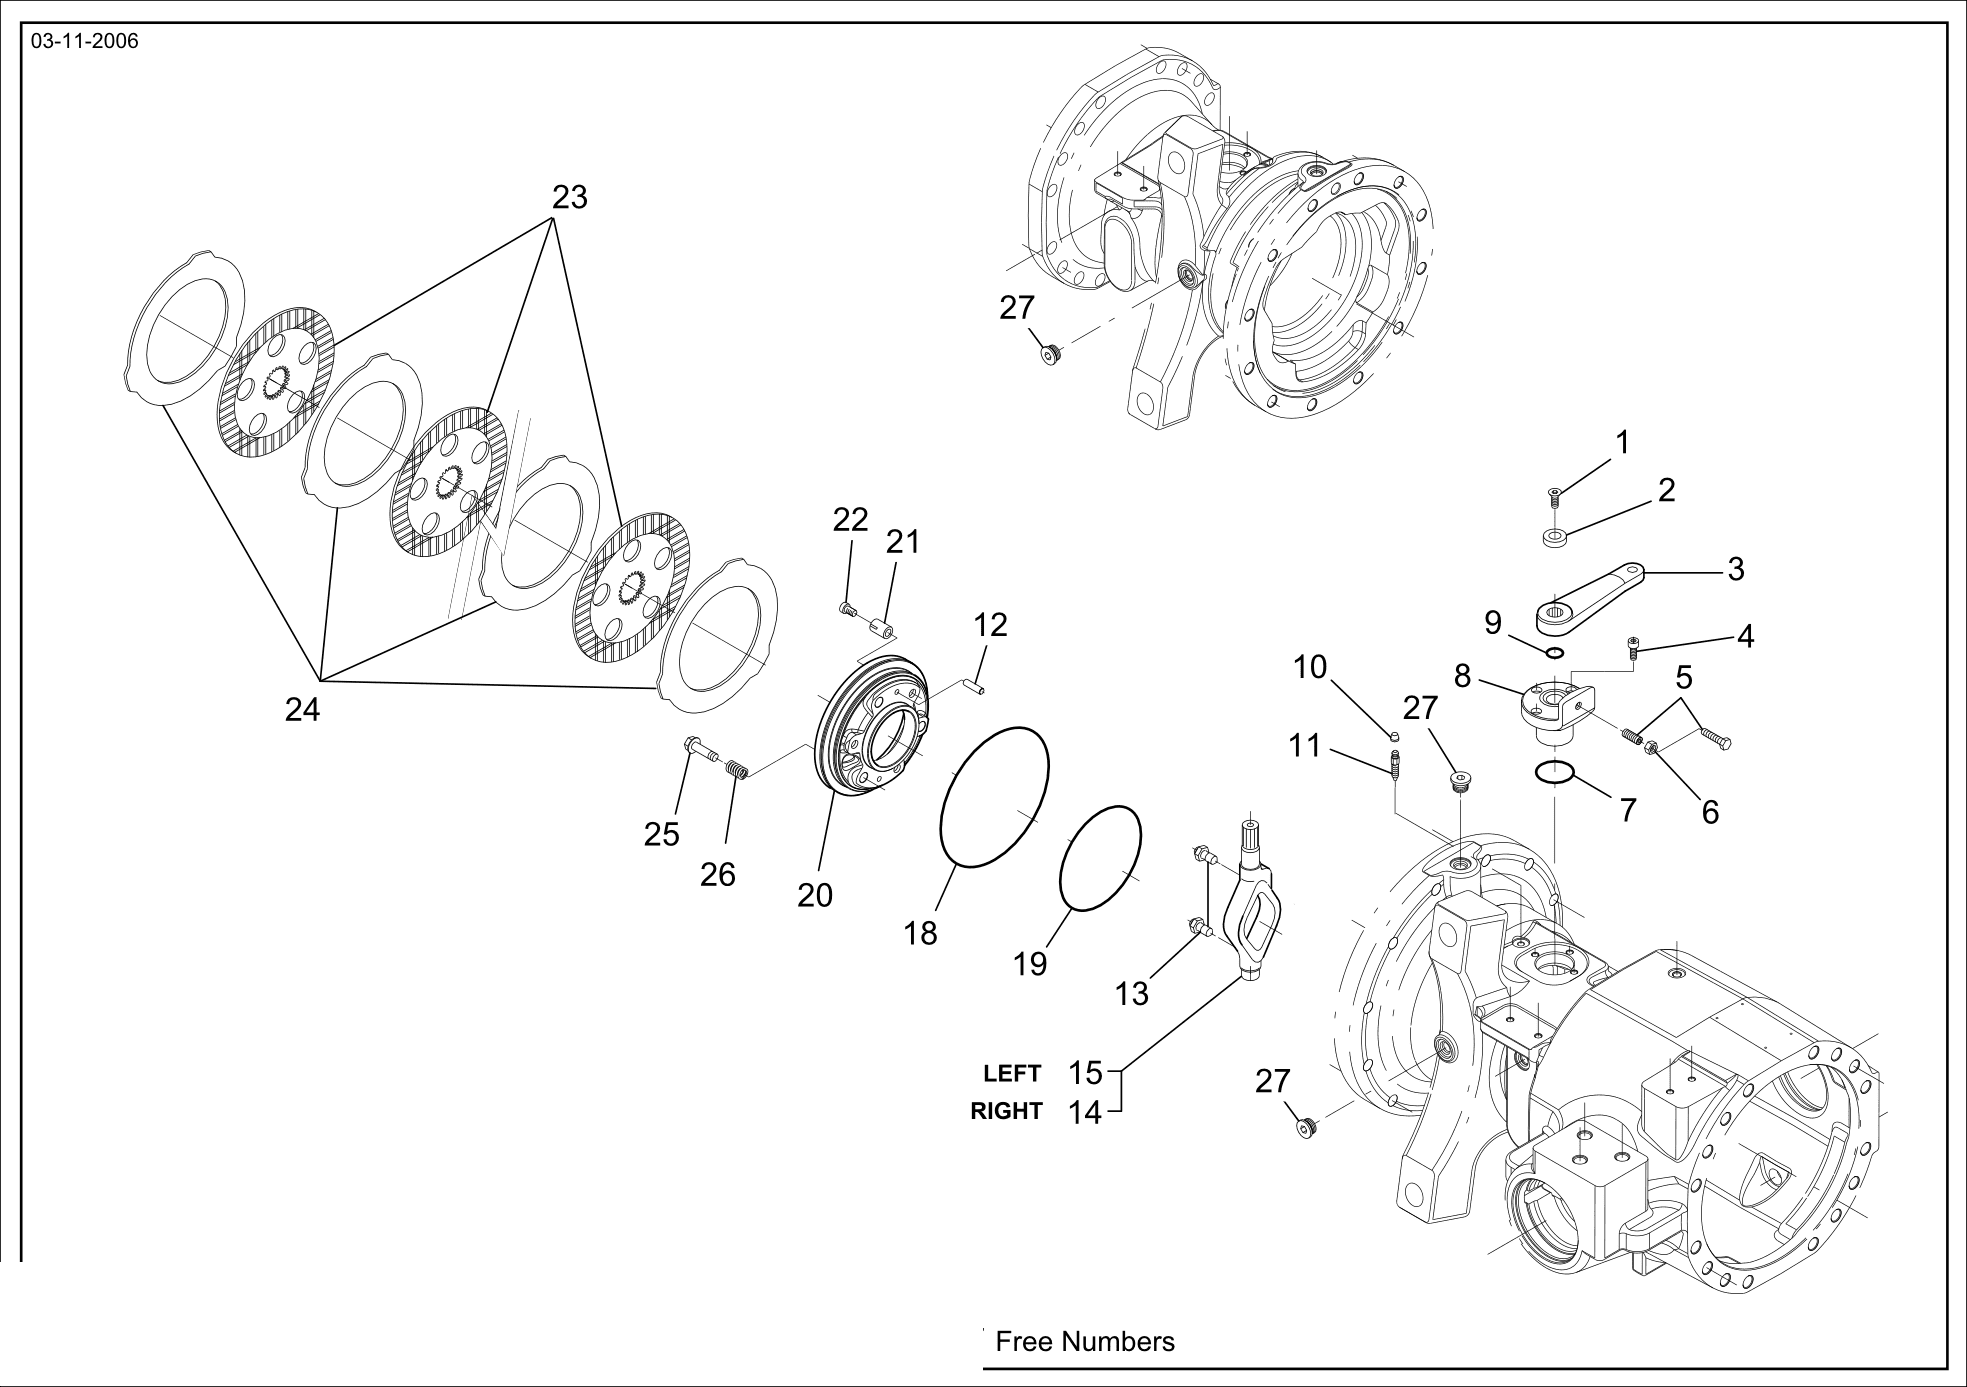 drawing for GHH 1202-0075 - BOLT (figure 5)